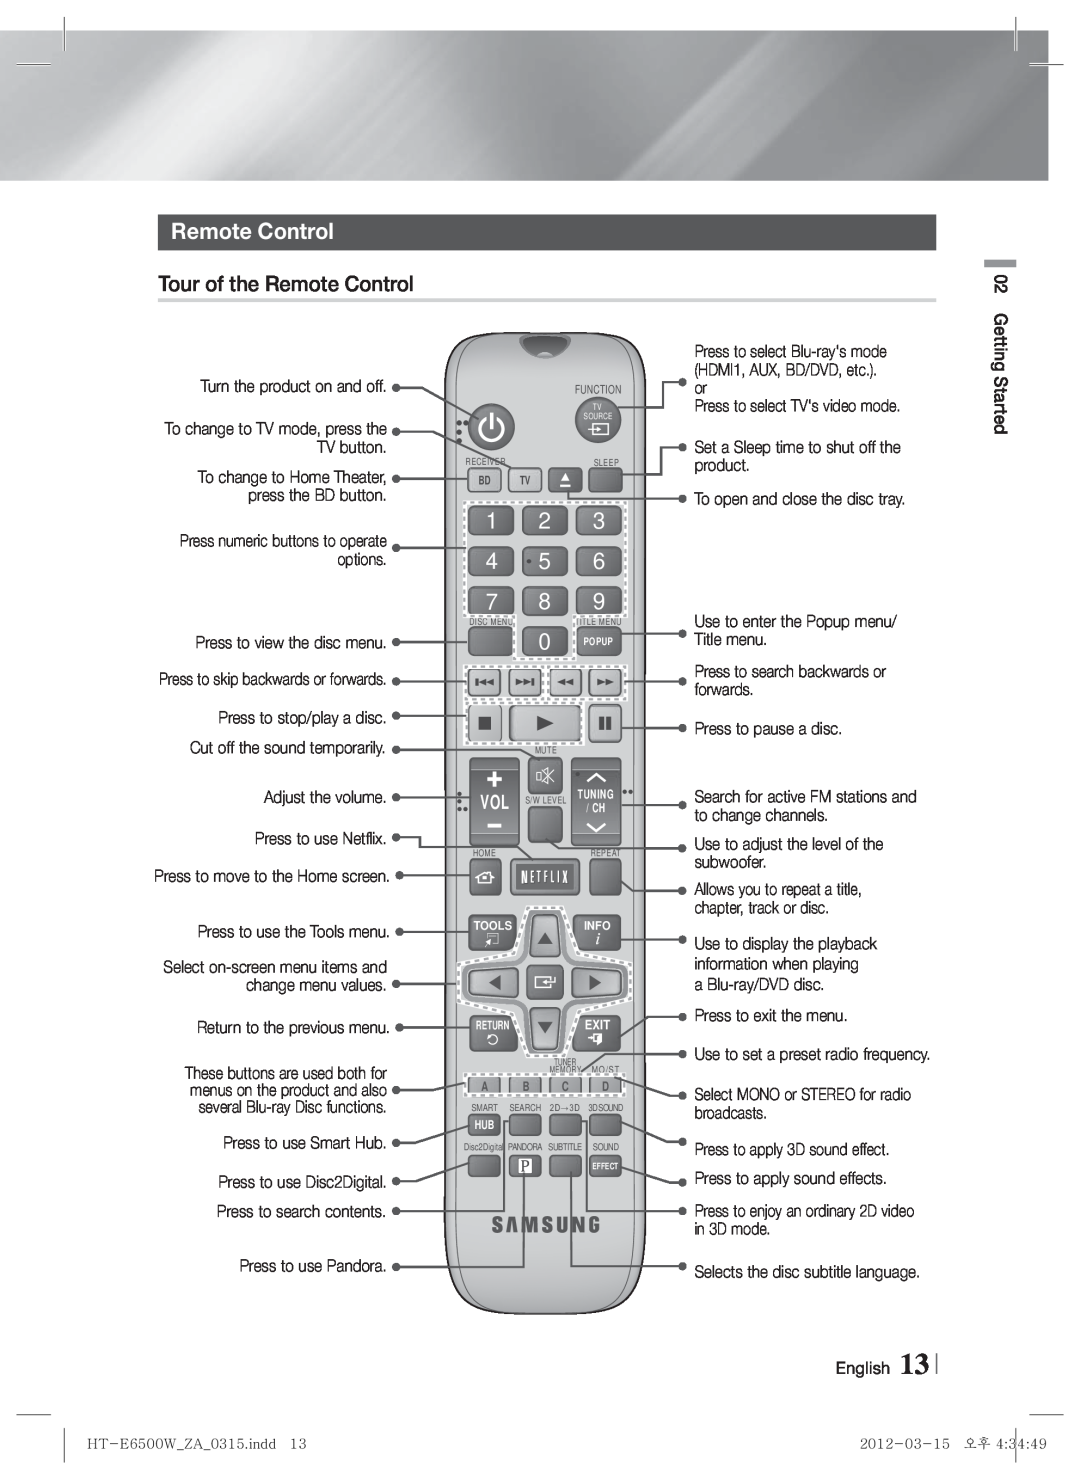 Samsung HTE6500WZA Remote Control, 3 6 9, TV button, press the BD button, product, TITLE MENUUse to enter the Popup menu 